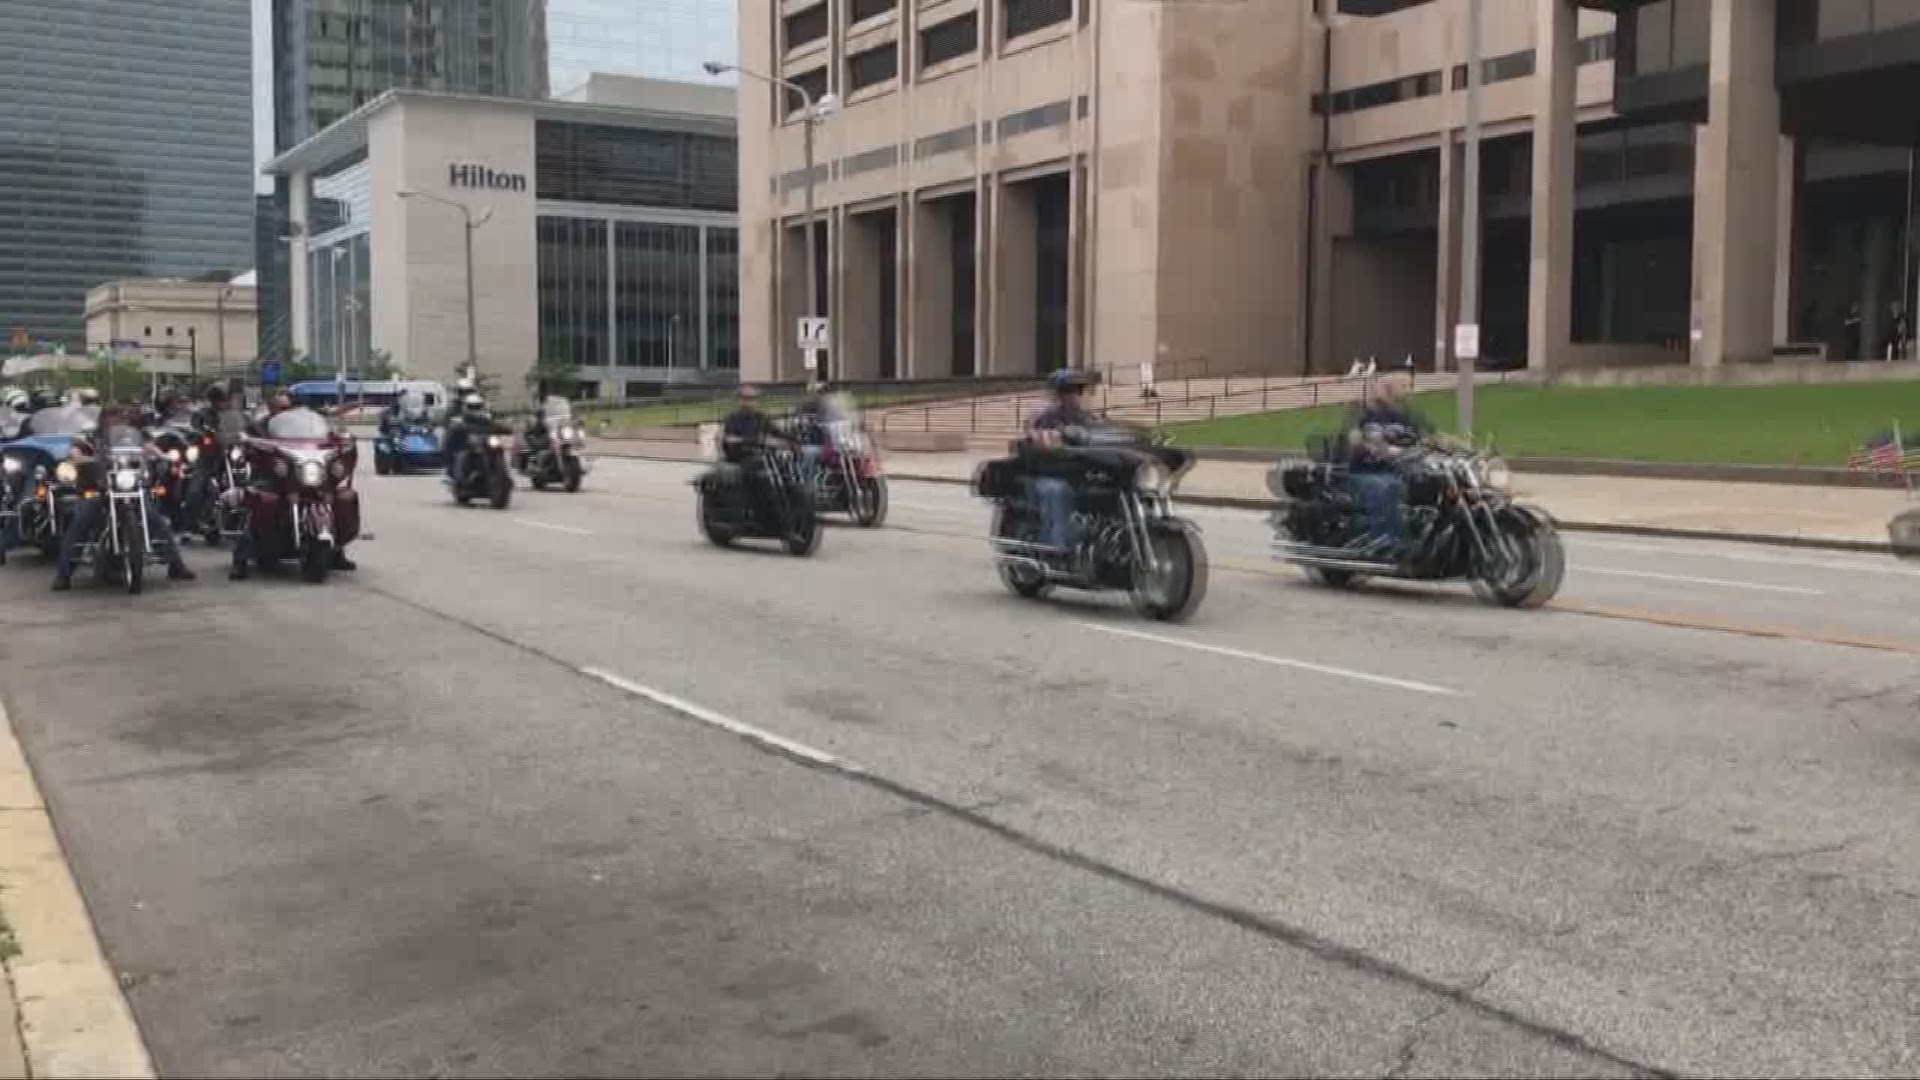 10th Annual Cops ride honors fallen officers